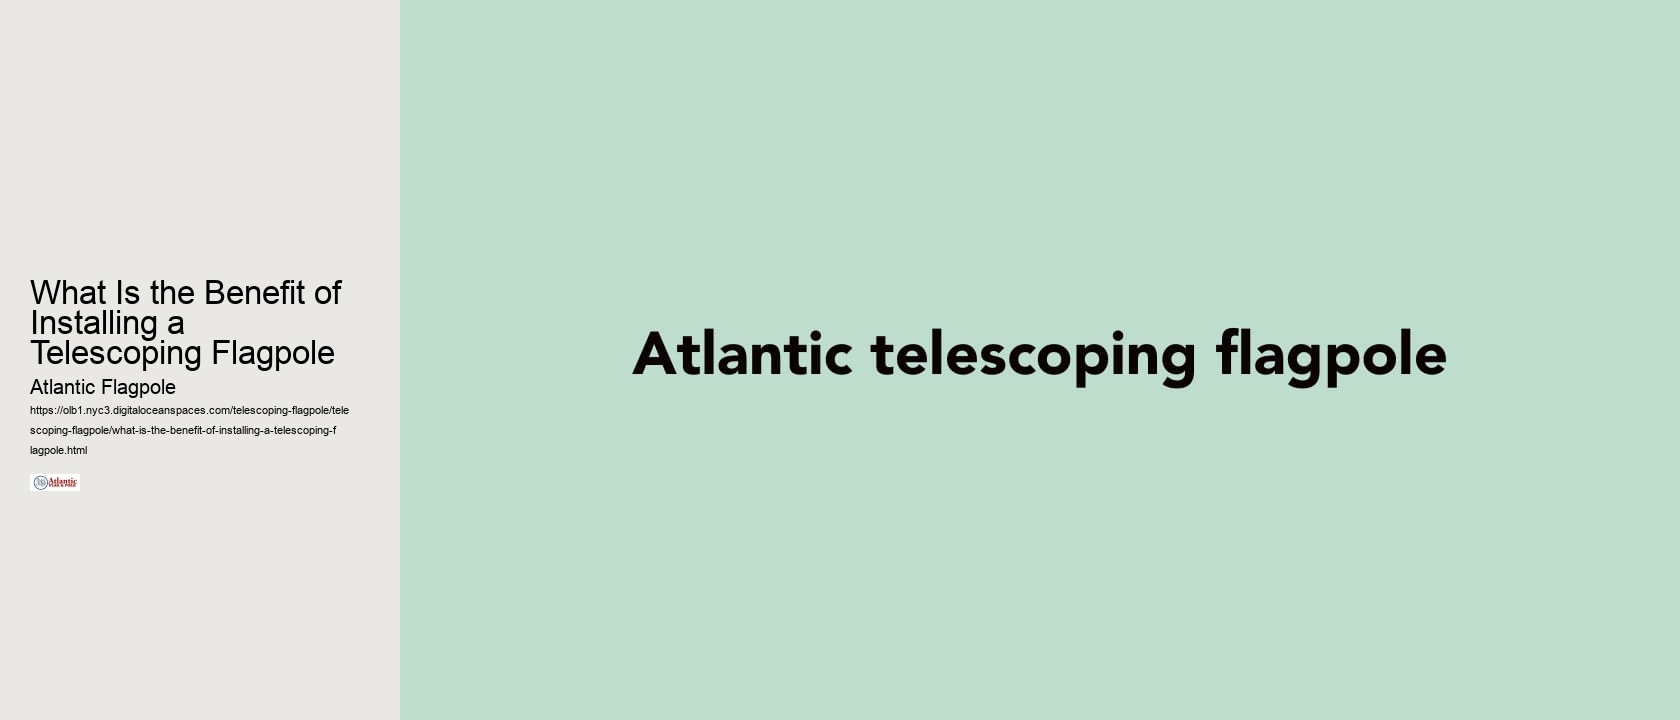 What Is the Benefit of Installing a Telescoping Flagpole